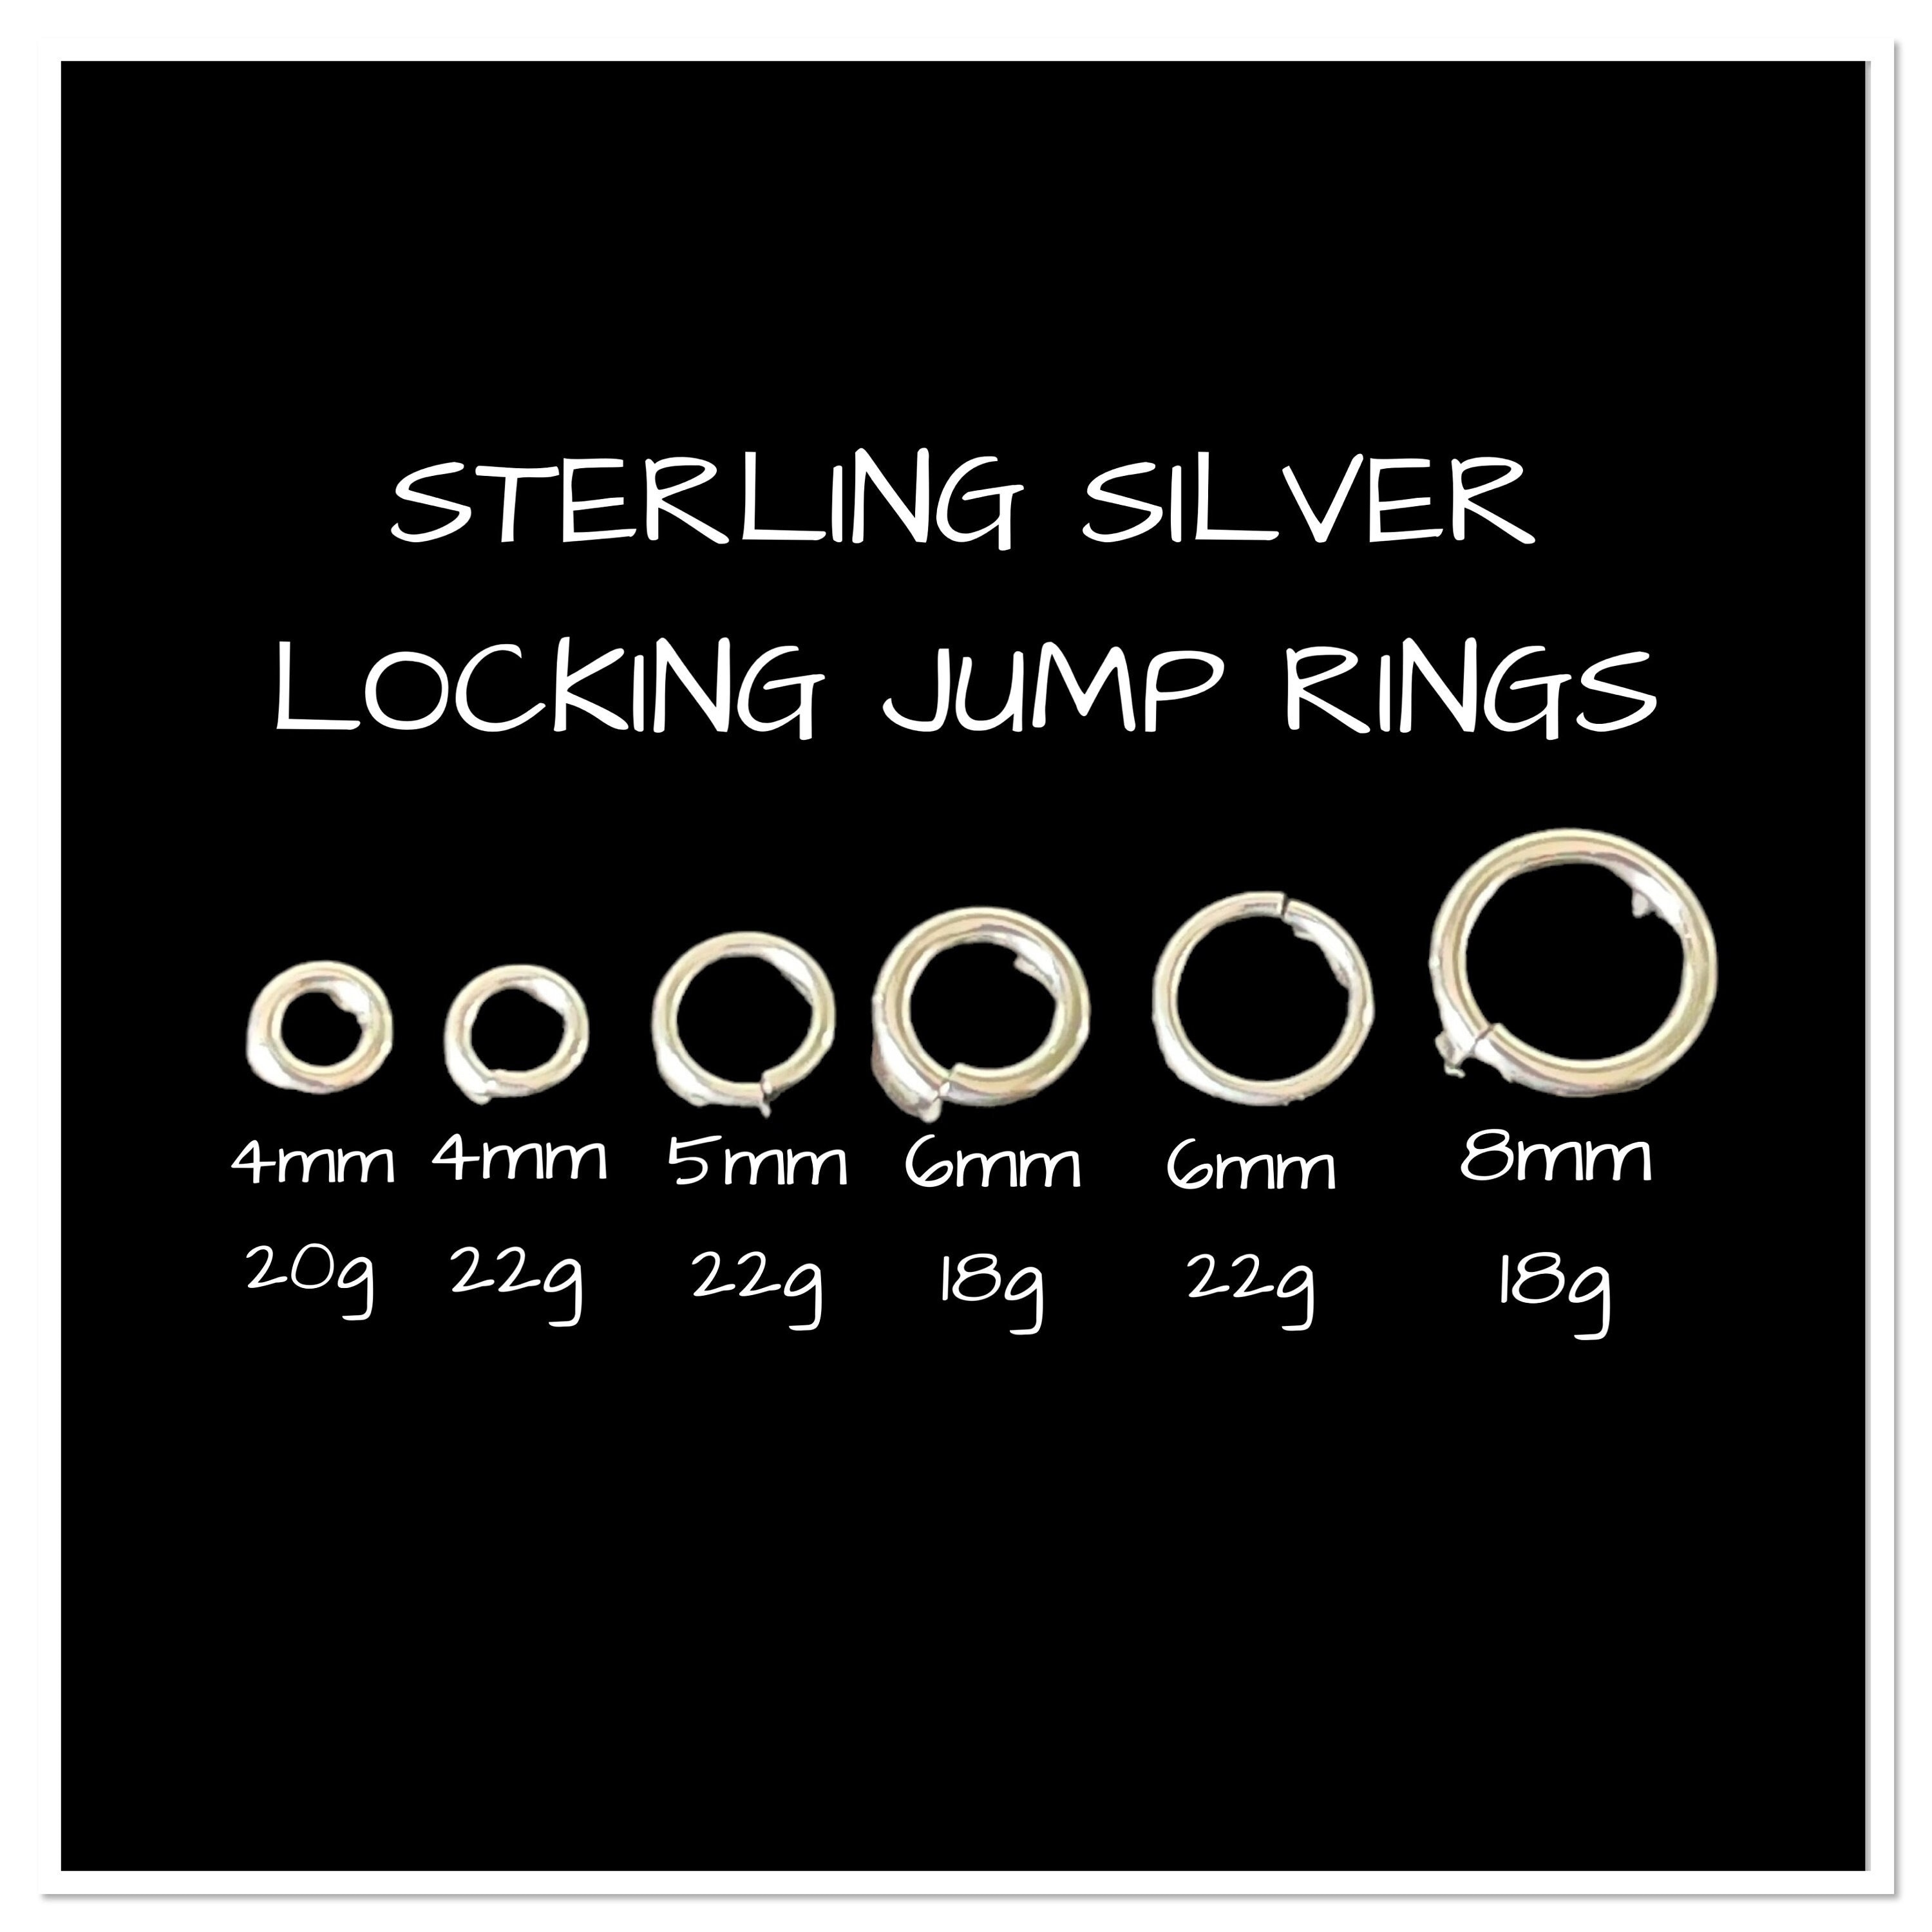 SNAPEEZ® II ULTRAPLATE® Ring Hard Open Jump Ring 4mm Heavy Gauge (Pk 50).  Made in USA.